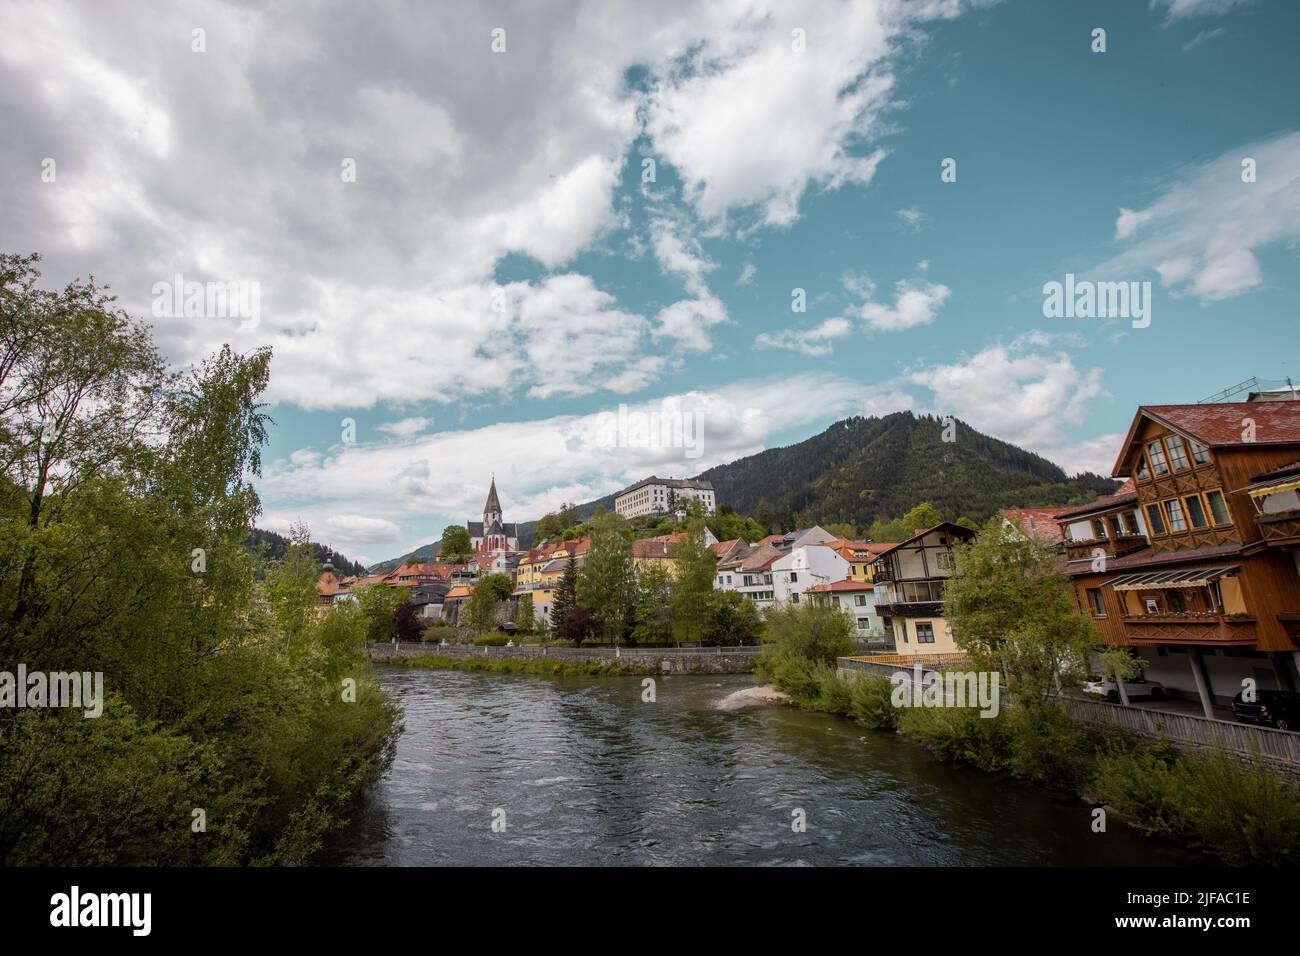 Mura or Mur river flowing through Murau city centre, in central part of austria on a cloudy but sunny day. Church and classical buildings are seen in Stock Photo